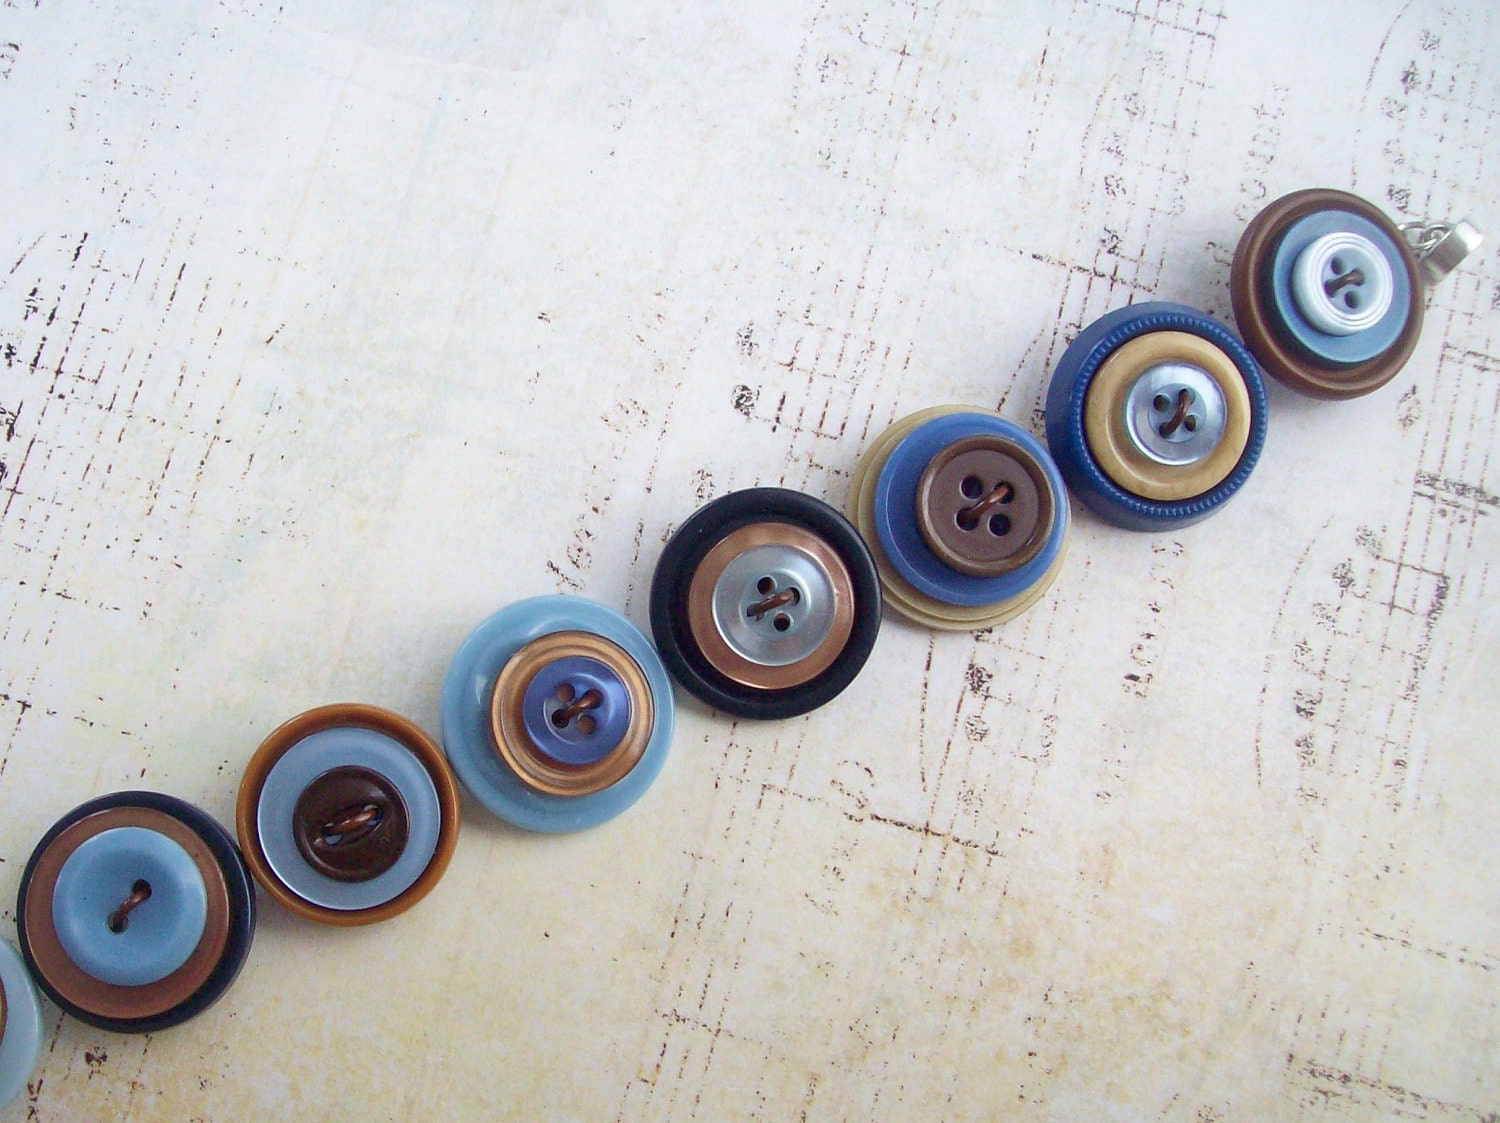 Repurposed Vintage Button Bracelet with Magnetic Clasp - DixiesNightOwl